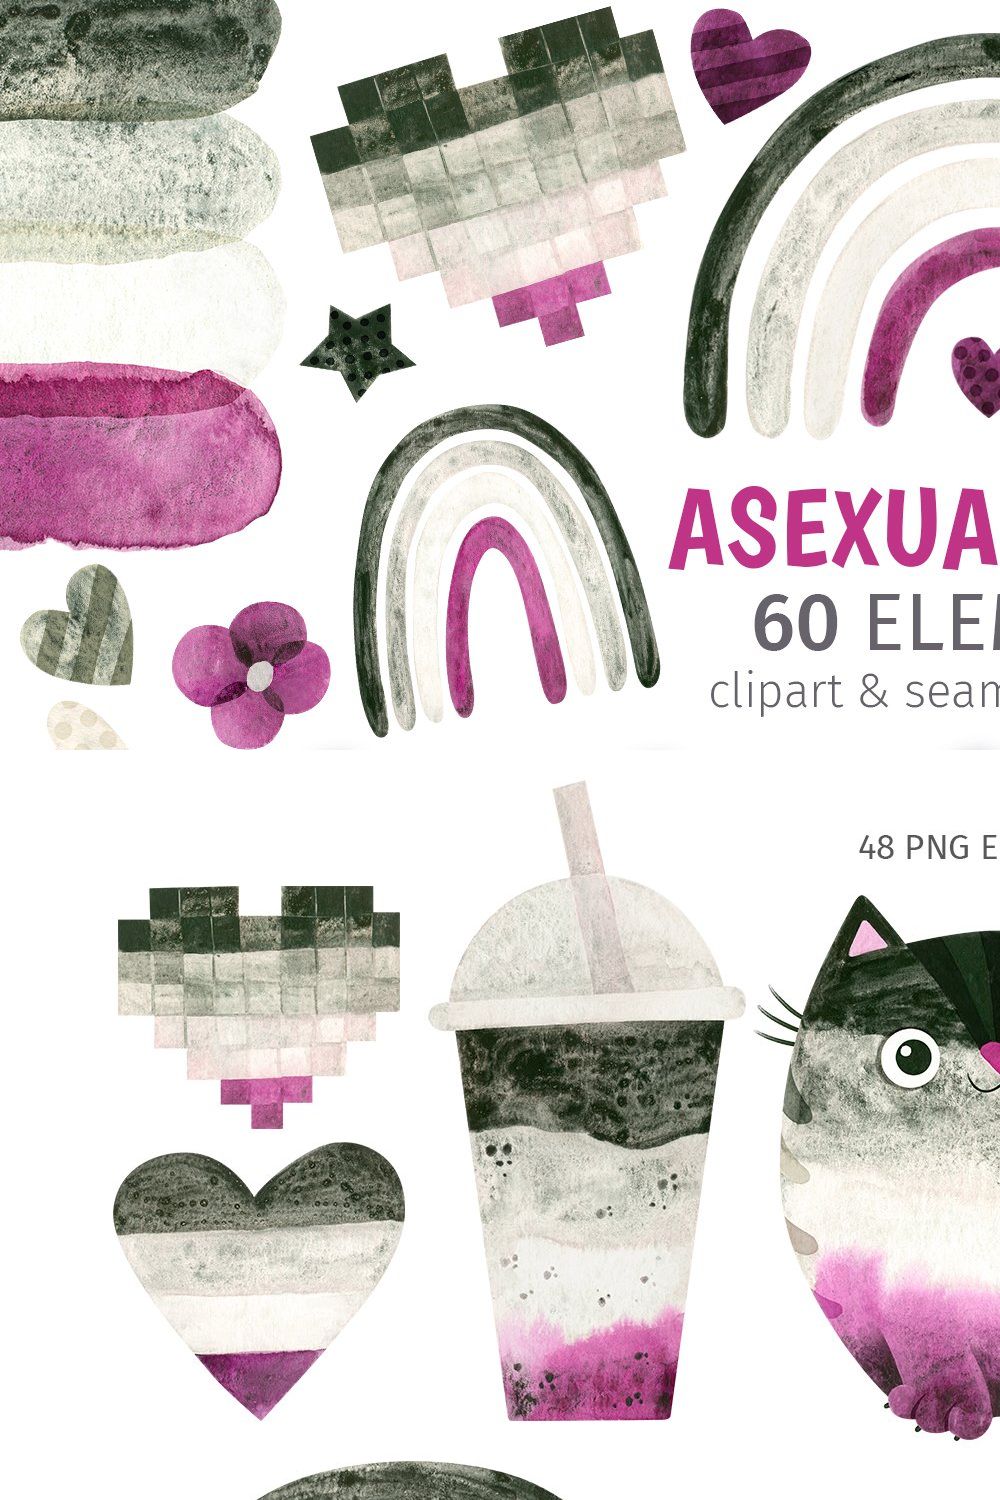 Asexual clipart and patterns pinterest preview image.